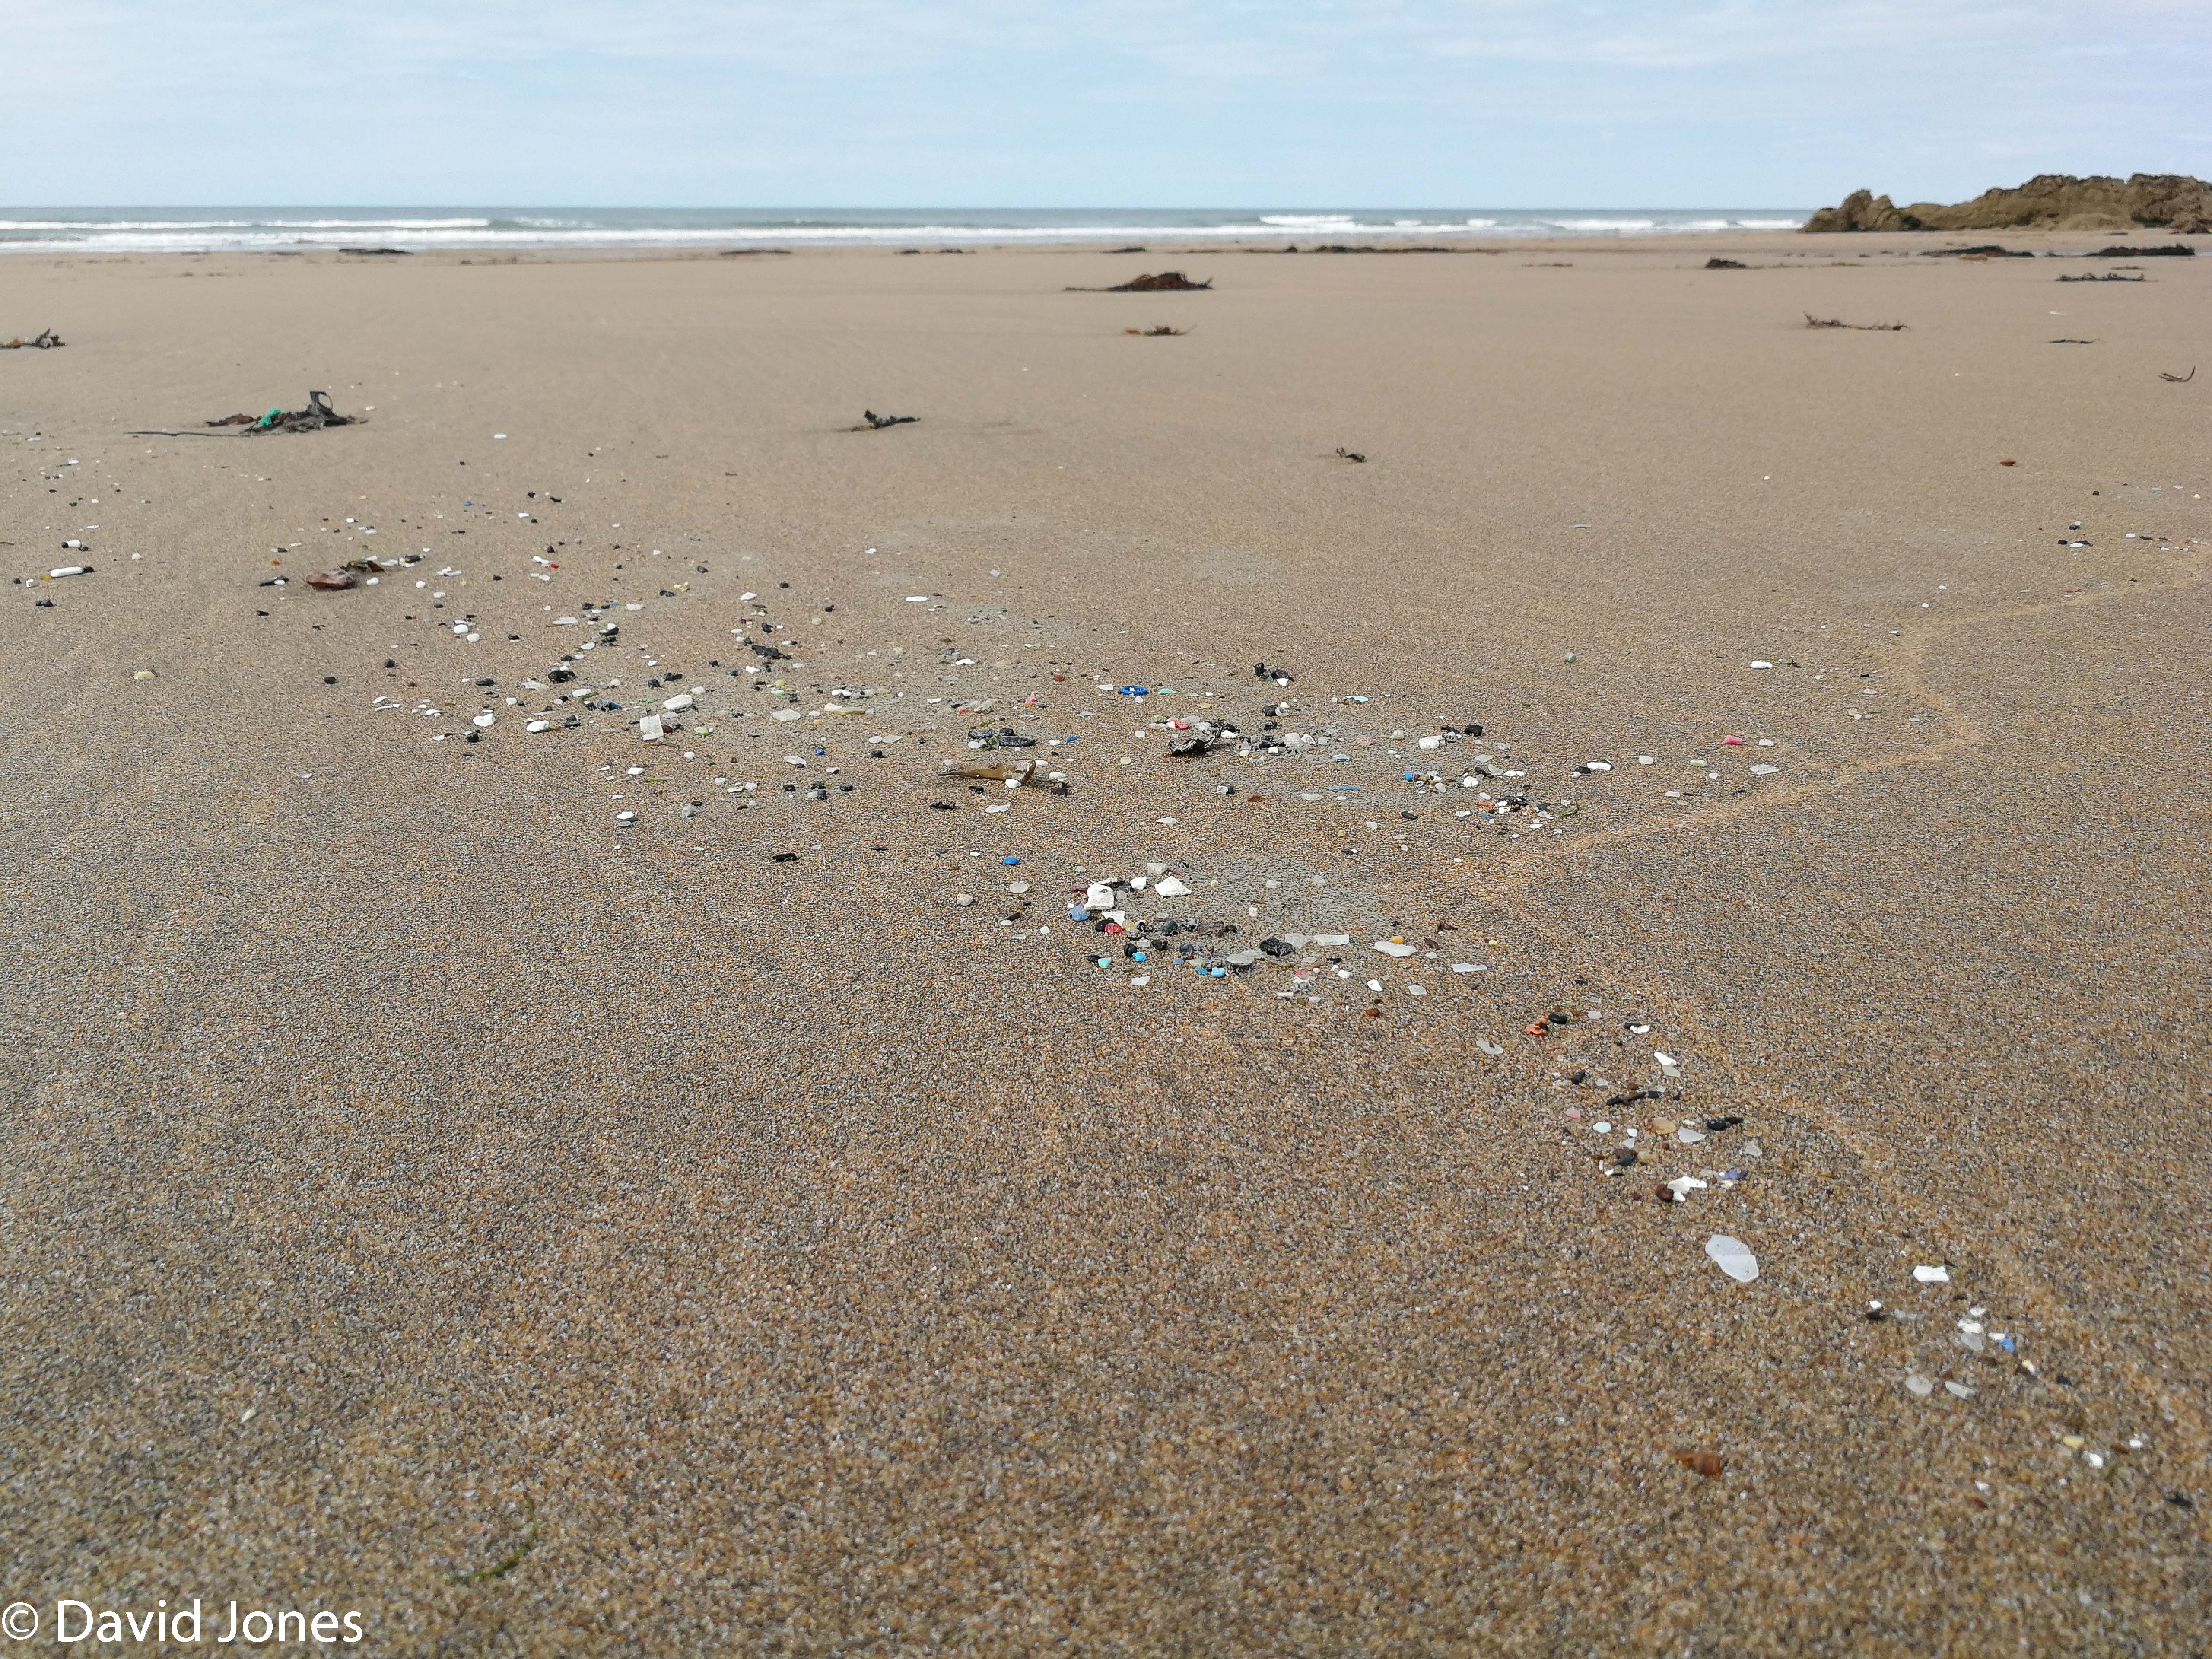 microplastics following a waveline in the sand